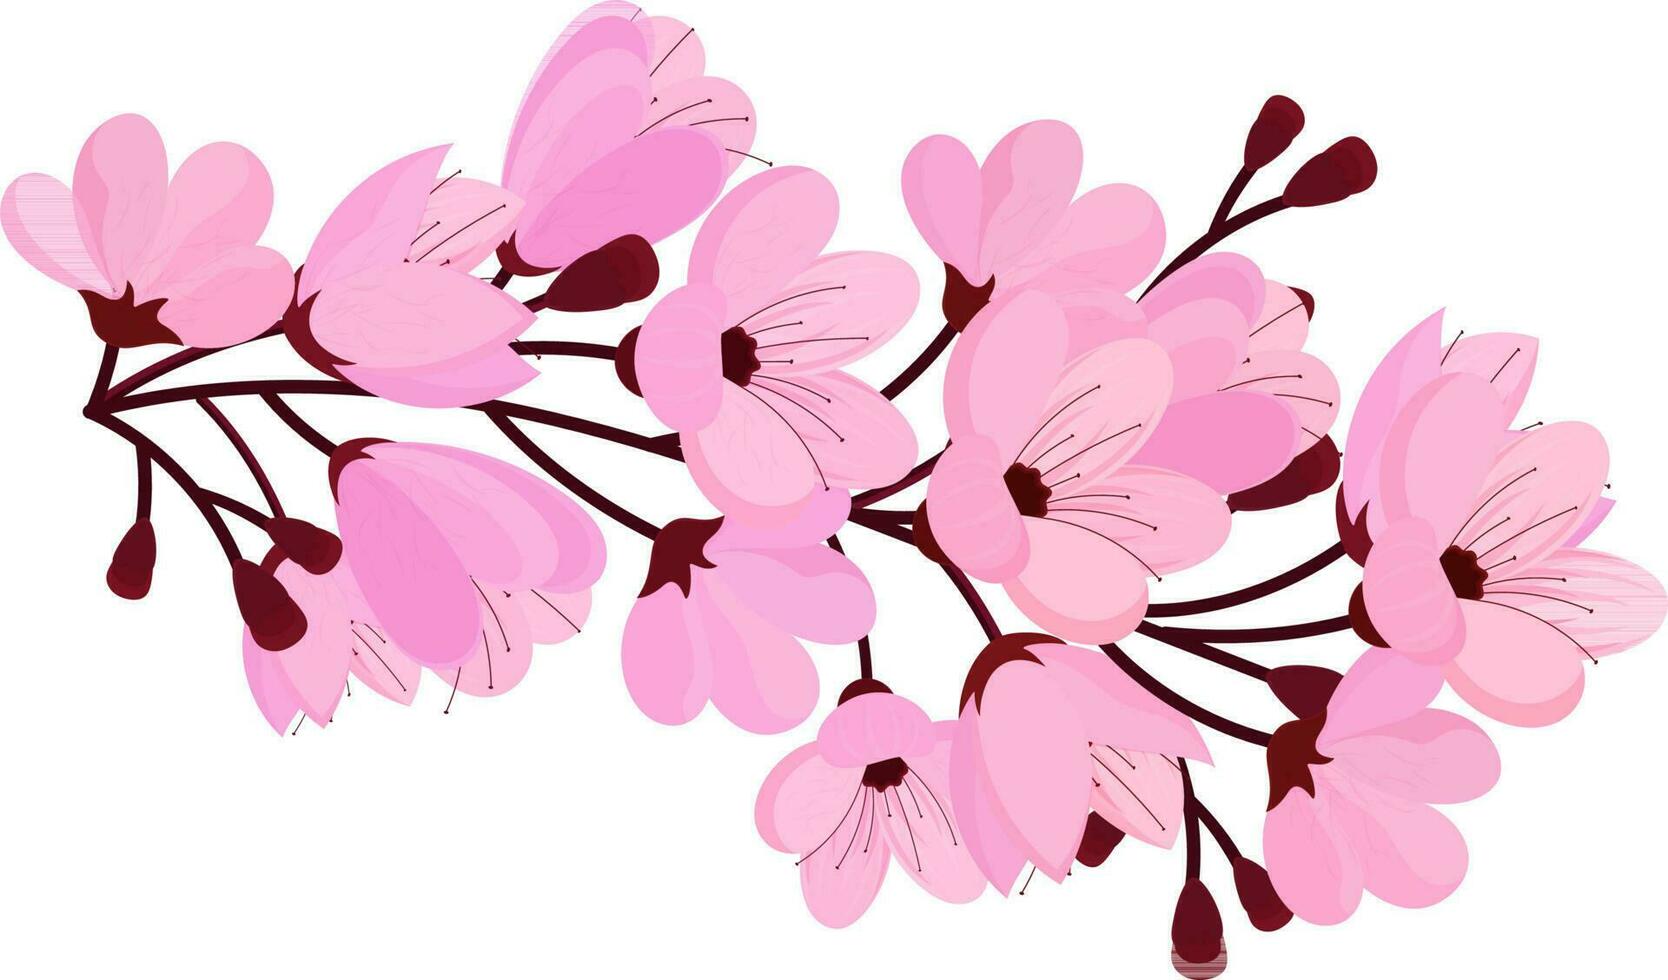 Pink color of flower and red steam for decorating concept. vector